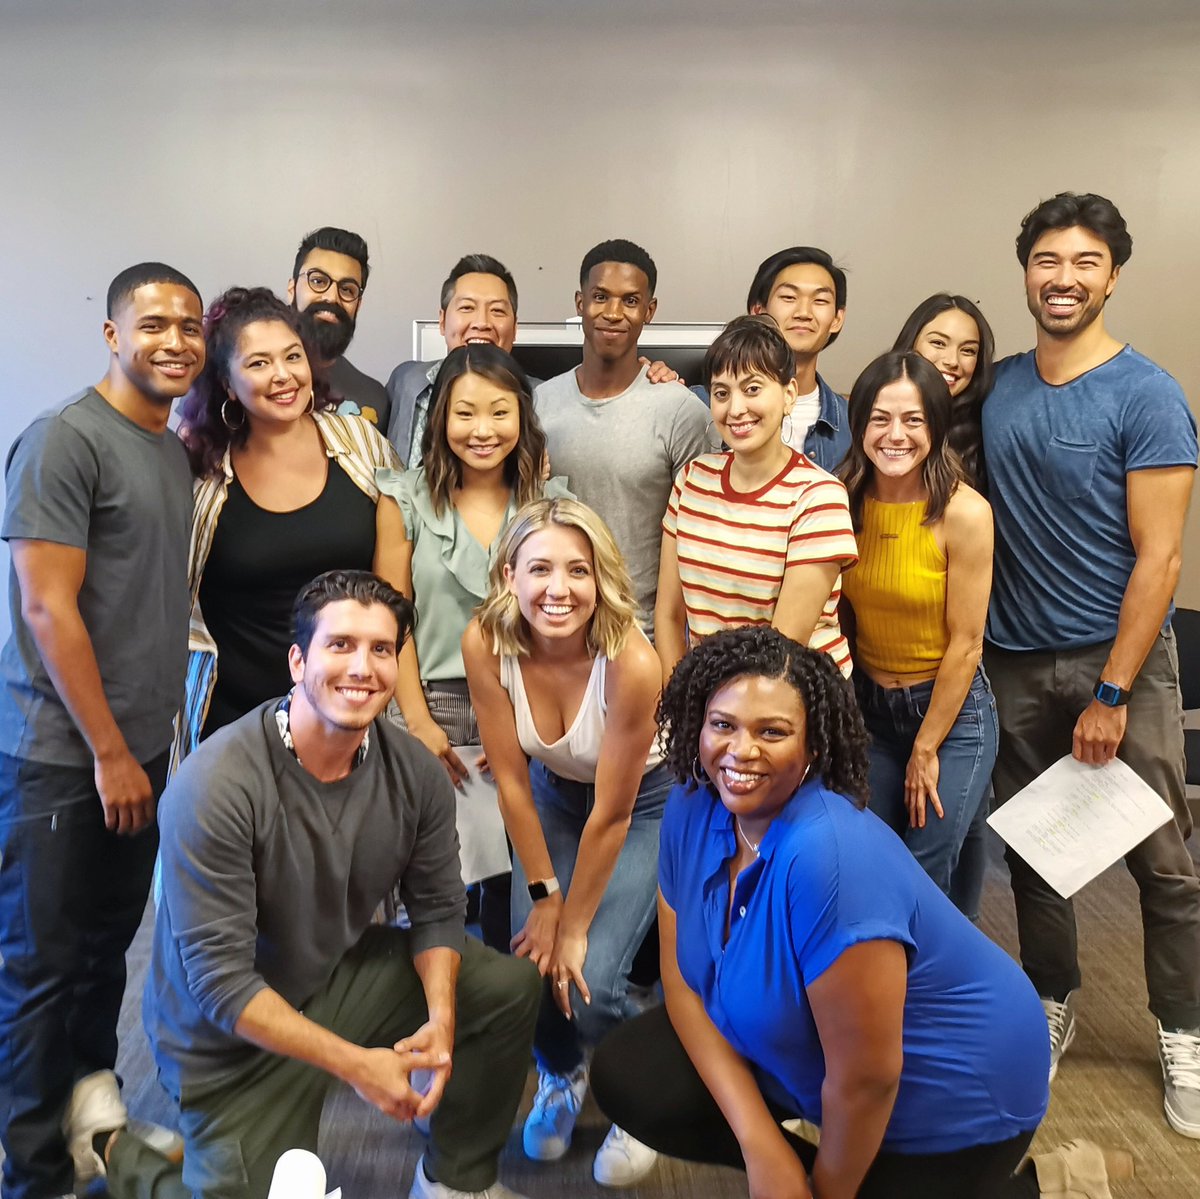 (1/2) That moment when actors find out they made the 2019 ABC Discovers: Los Angeles Talent Showcase! Congratulations and please welcome our 2019 Los Angeles Talent Showcase Cast! #ABCDiscovers #ABCTalentShowcase